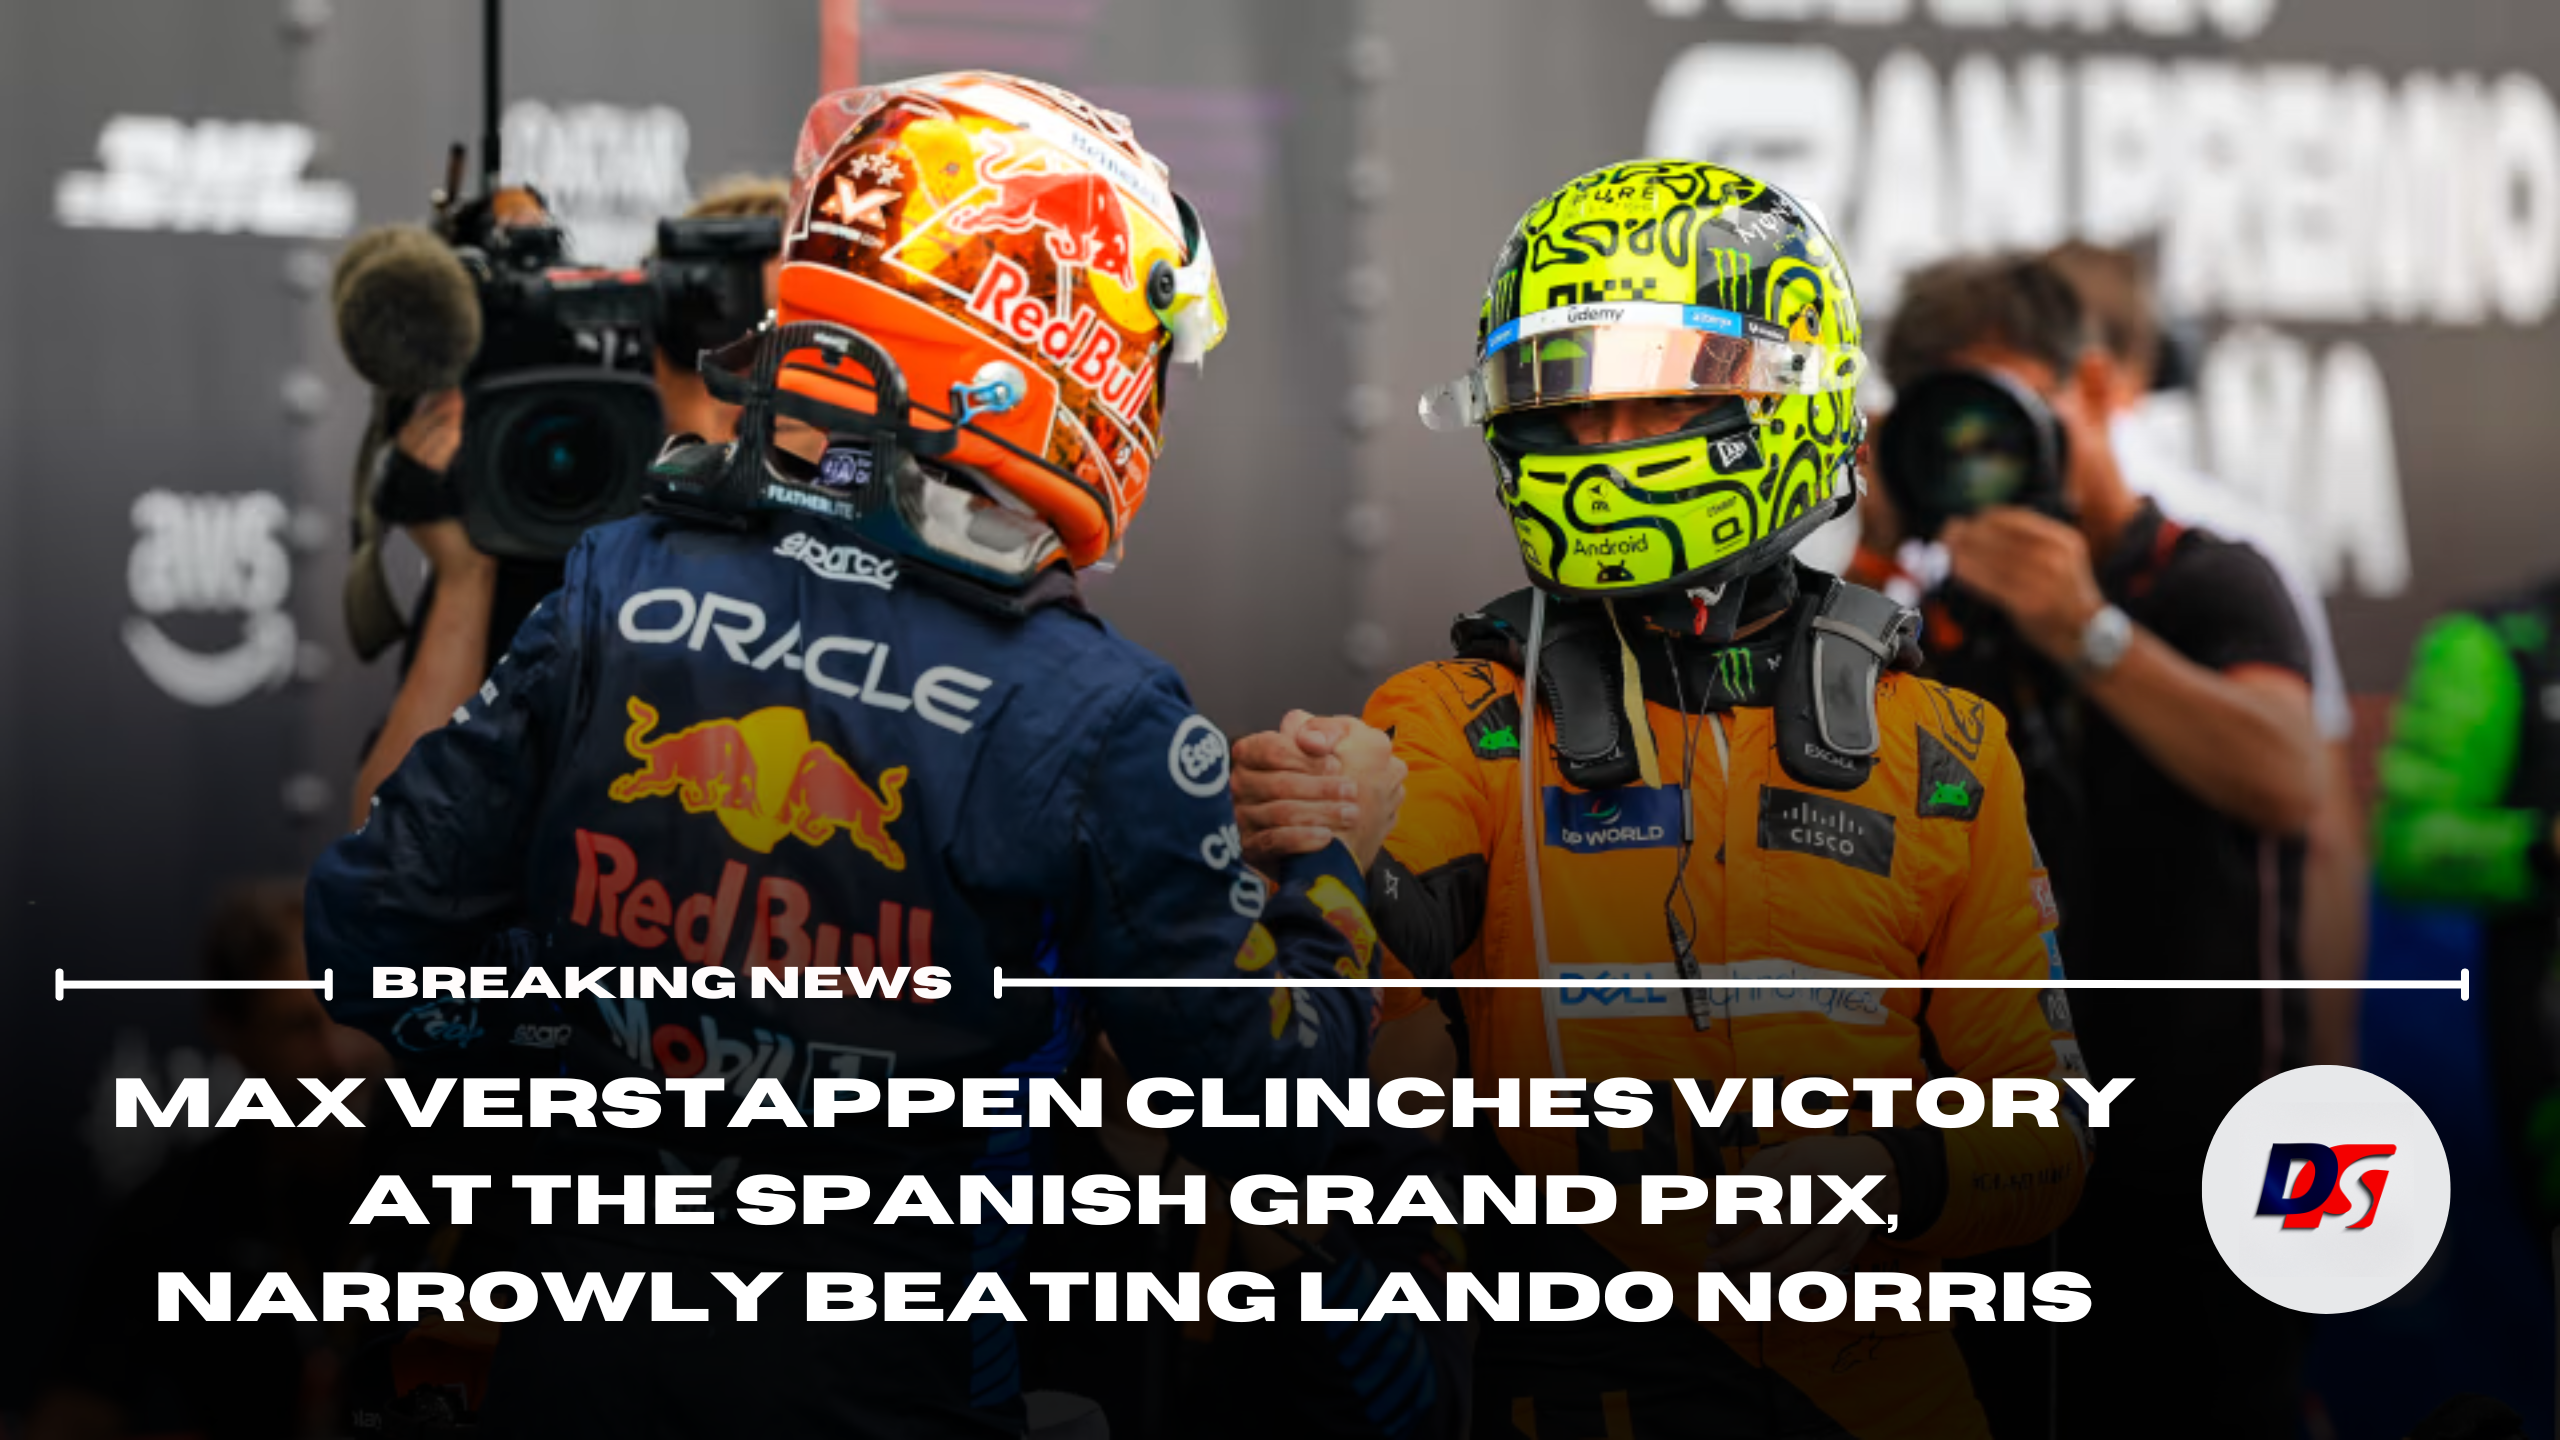 Max Verstappen clinches victory at the Spanish Grand Prix, narrowly beating Lando Norris